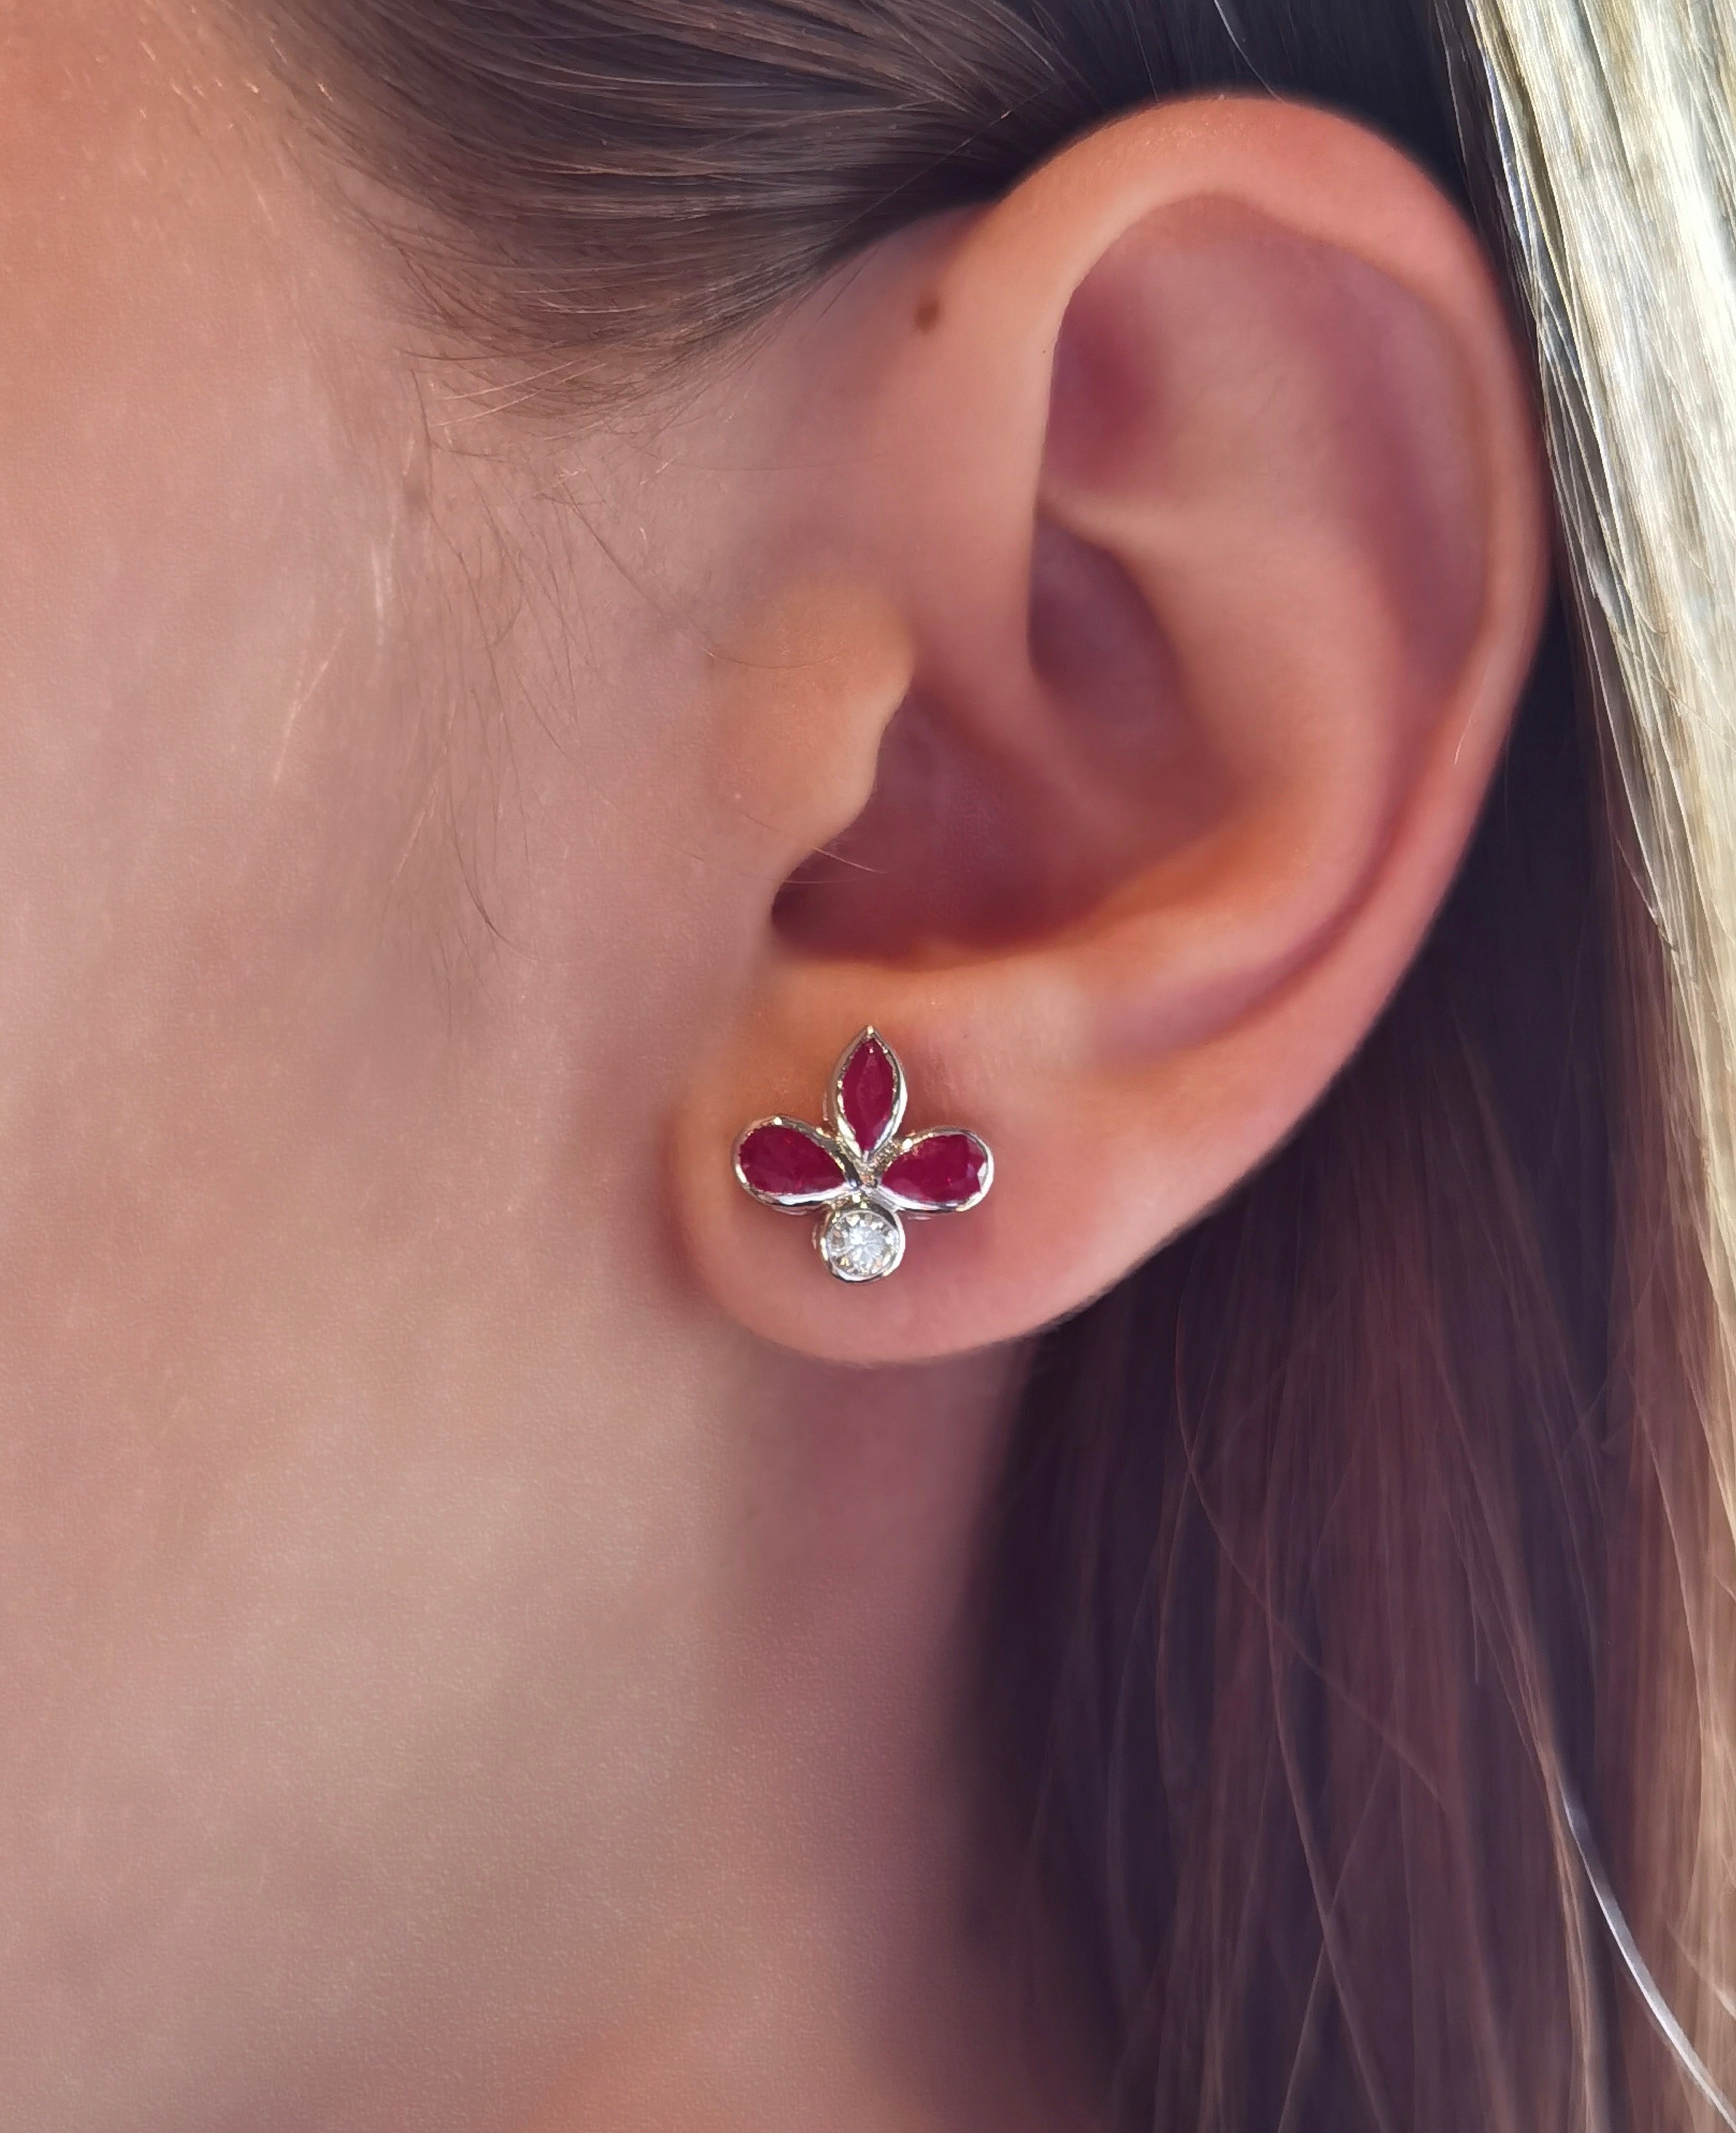 Misty earrings with rubies and diamonds